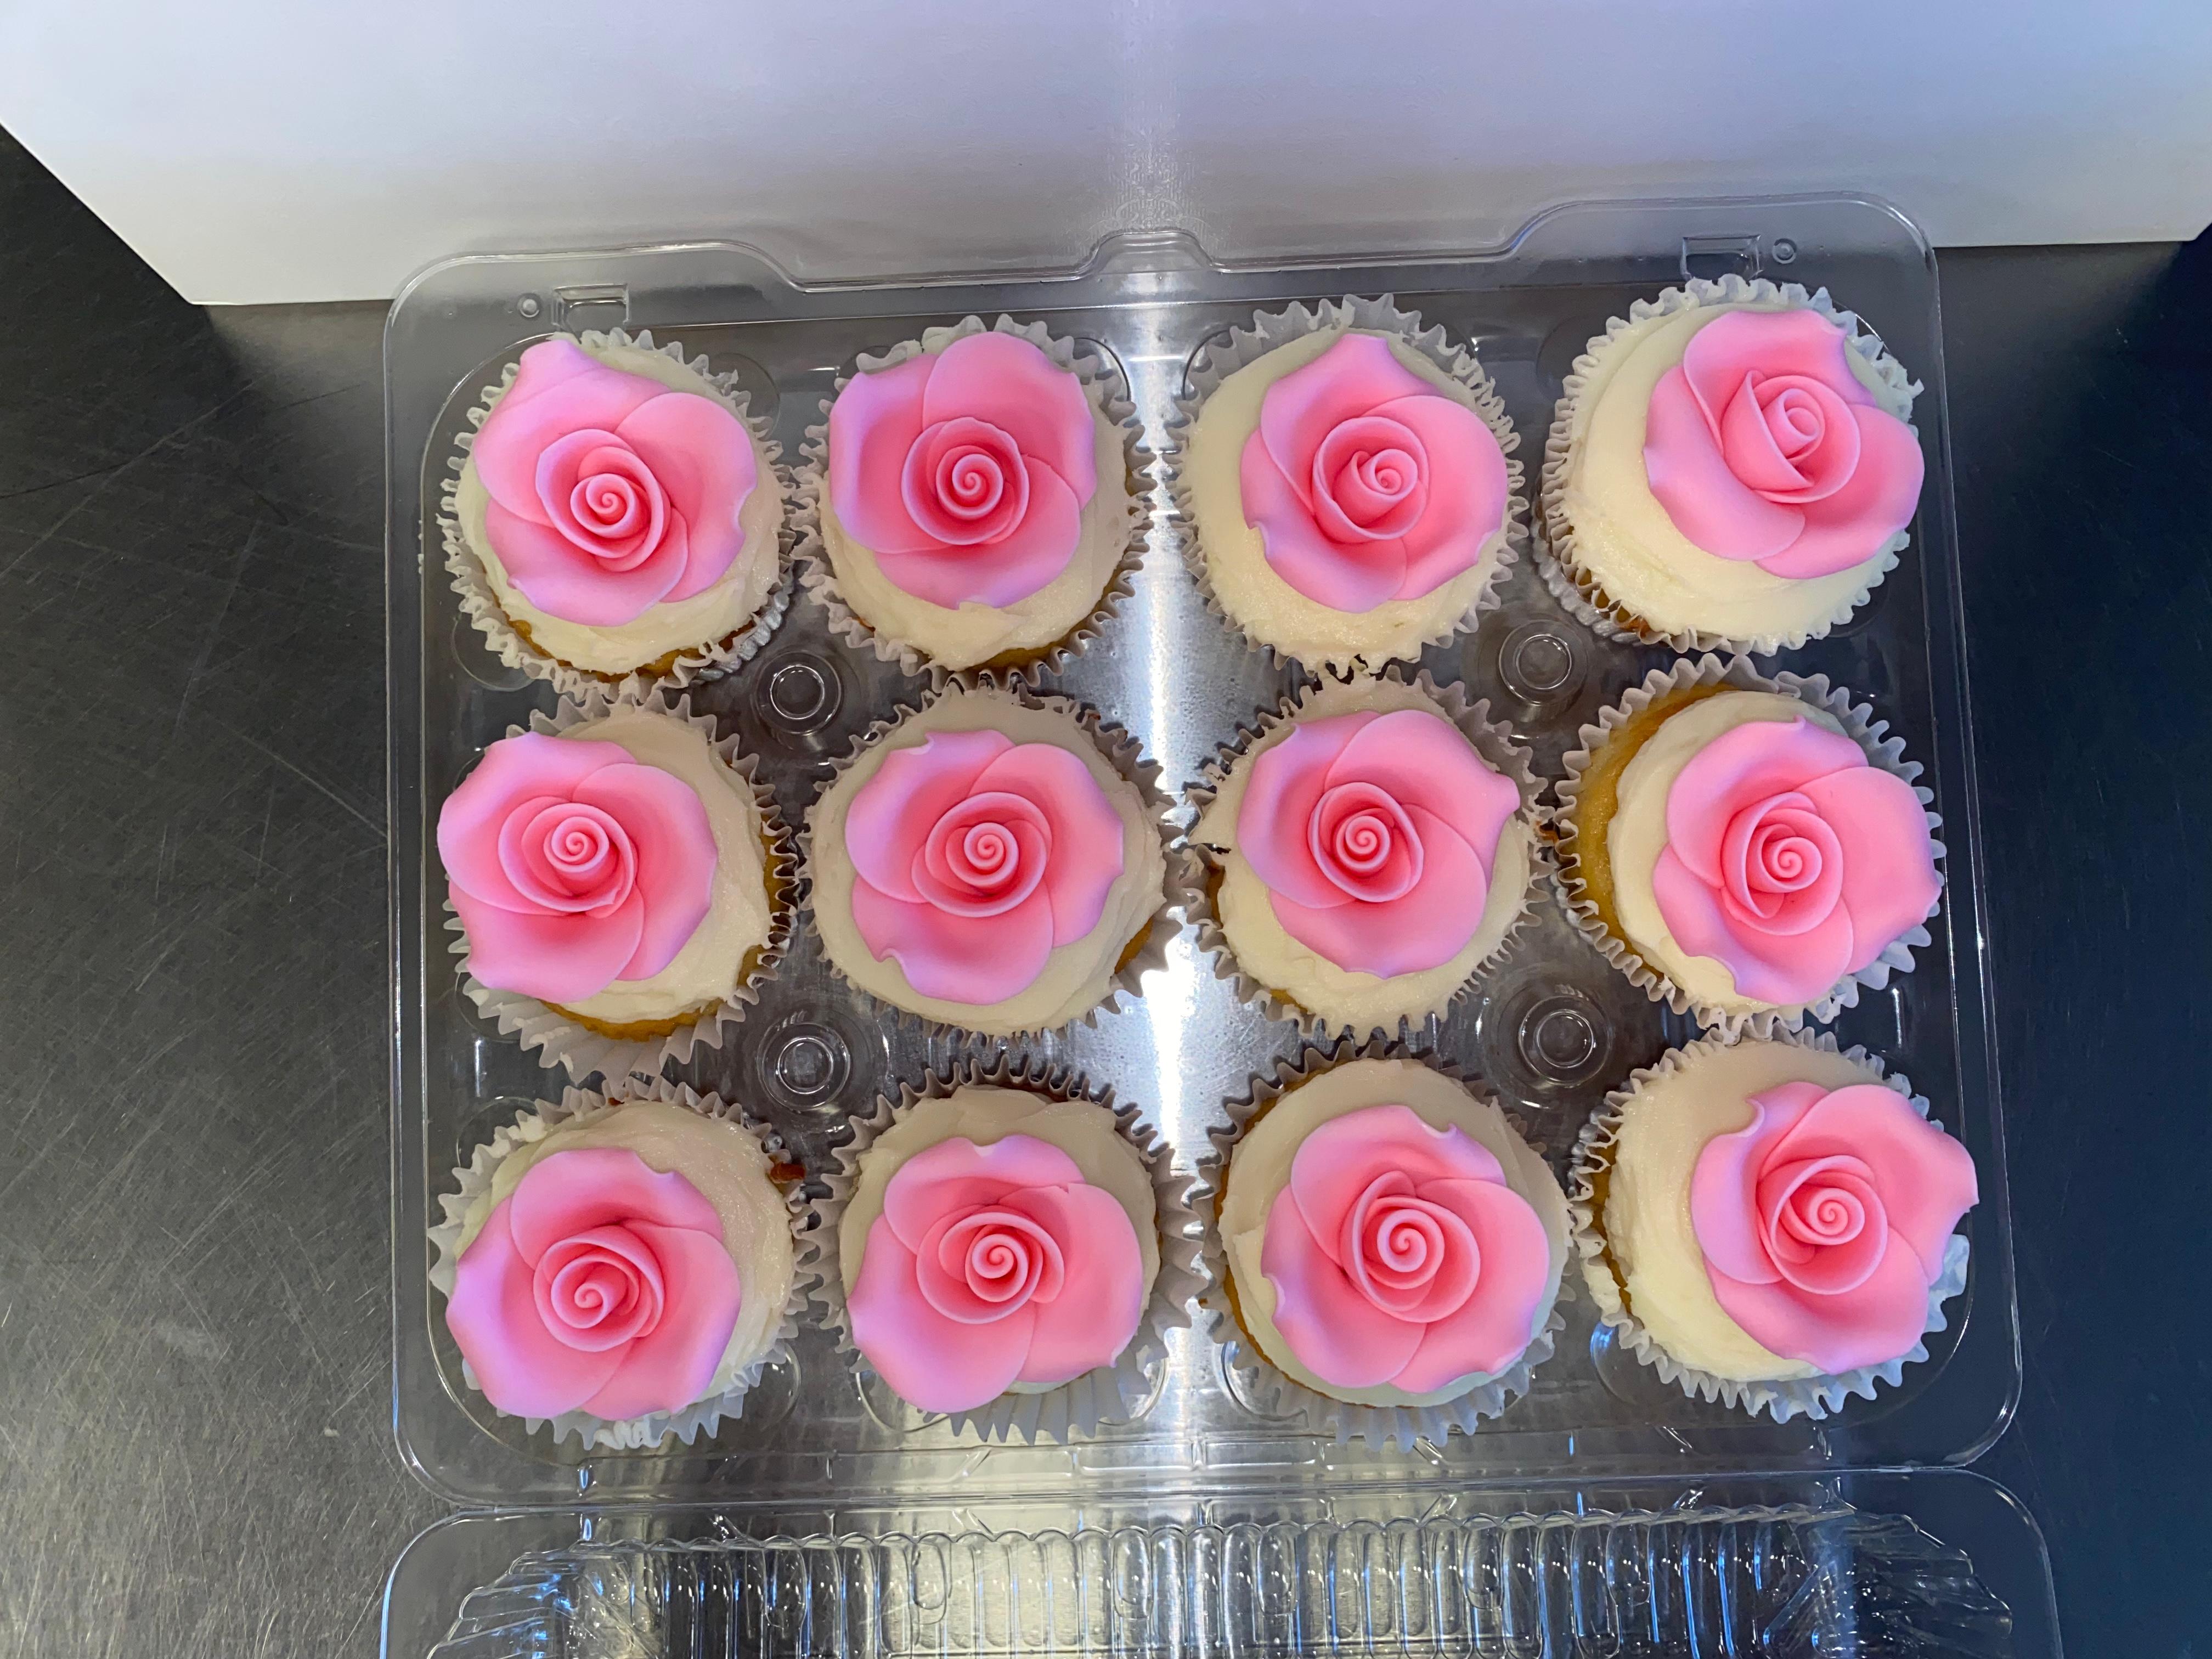 A very fun custom cupcake order with flower decorations!